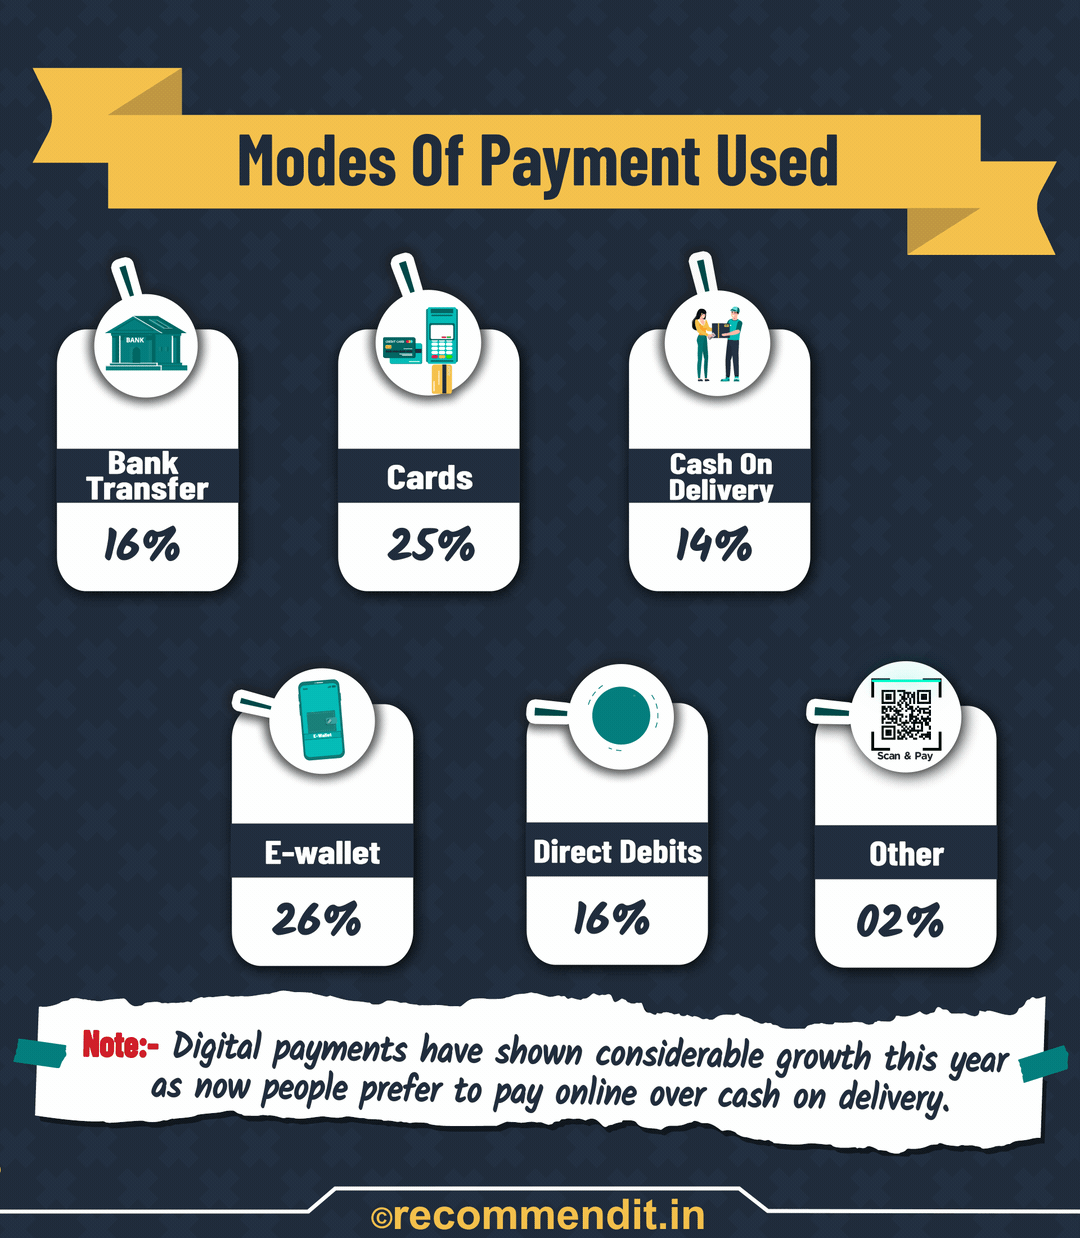 Modes of payment used